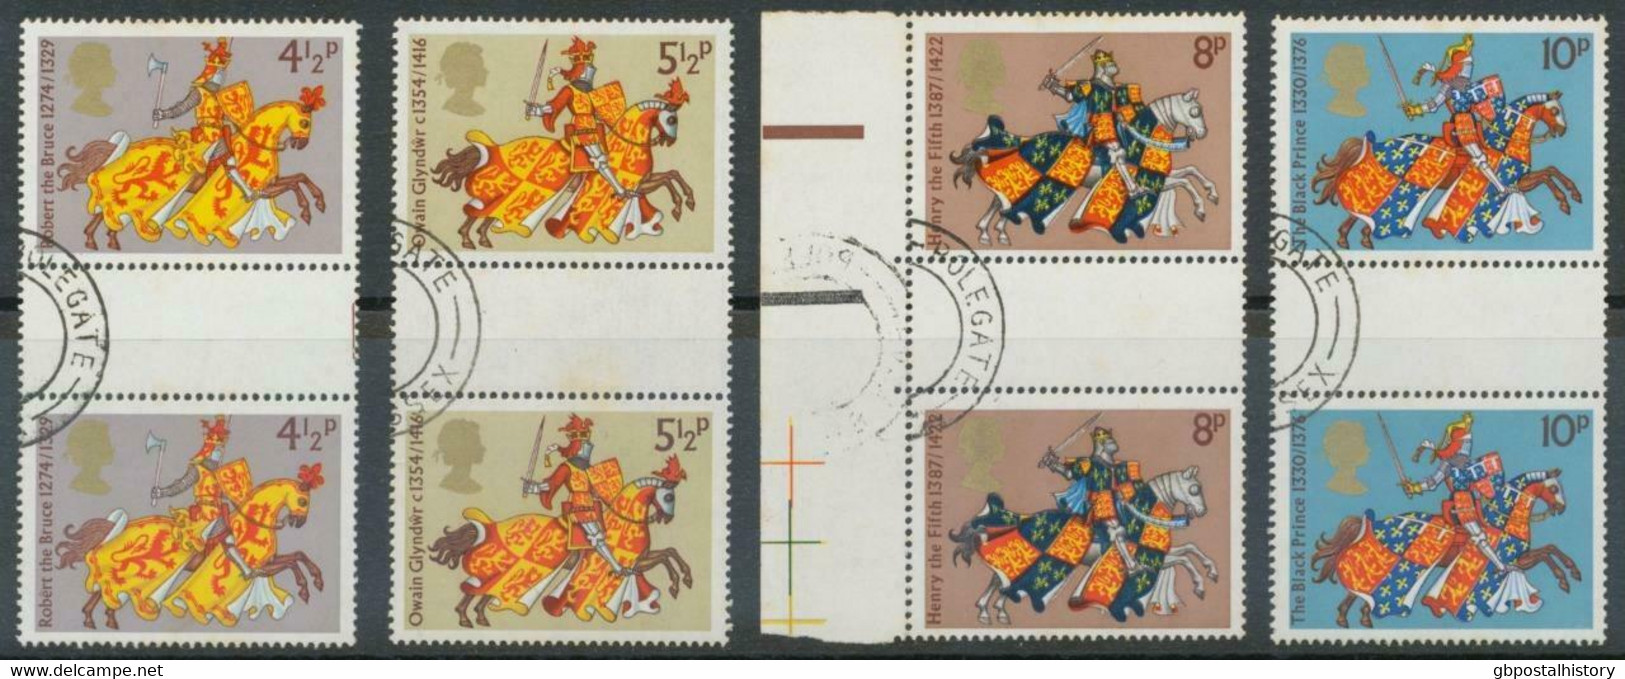 GB 1974, Medieval Warriors Set (4 V.) Superb USED GUTTERPAIRS (LP, SG No Price) - Used Stamps